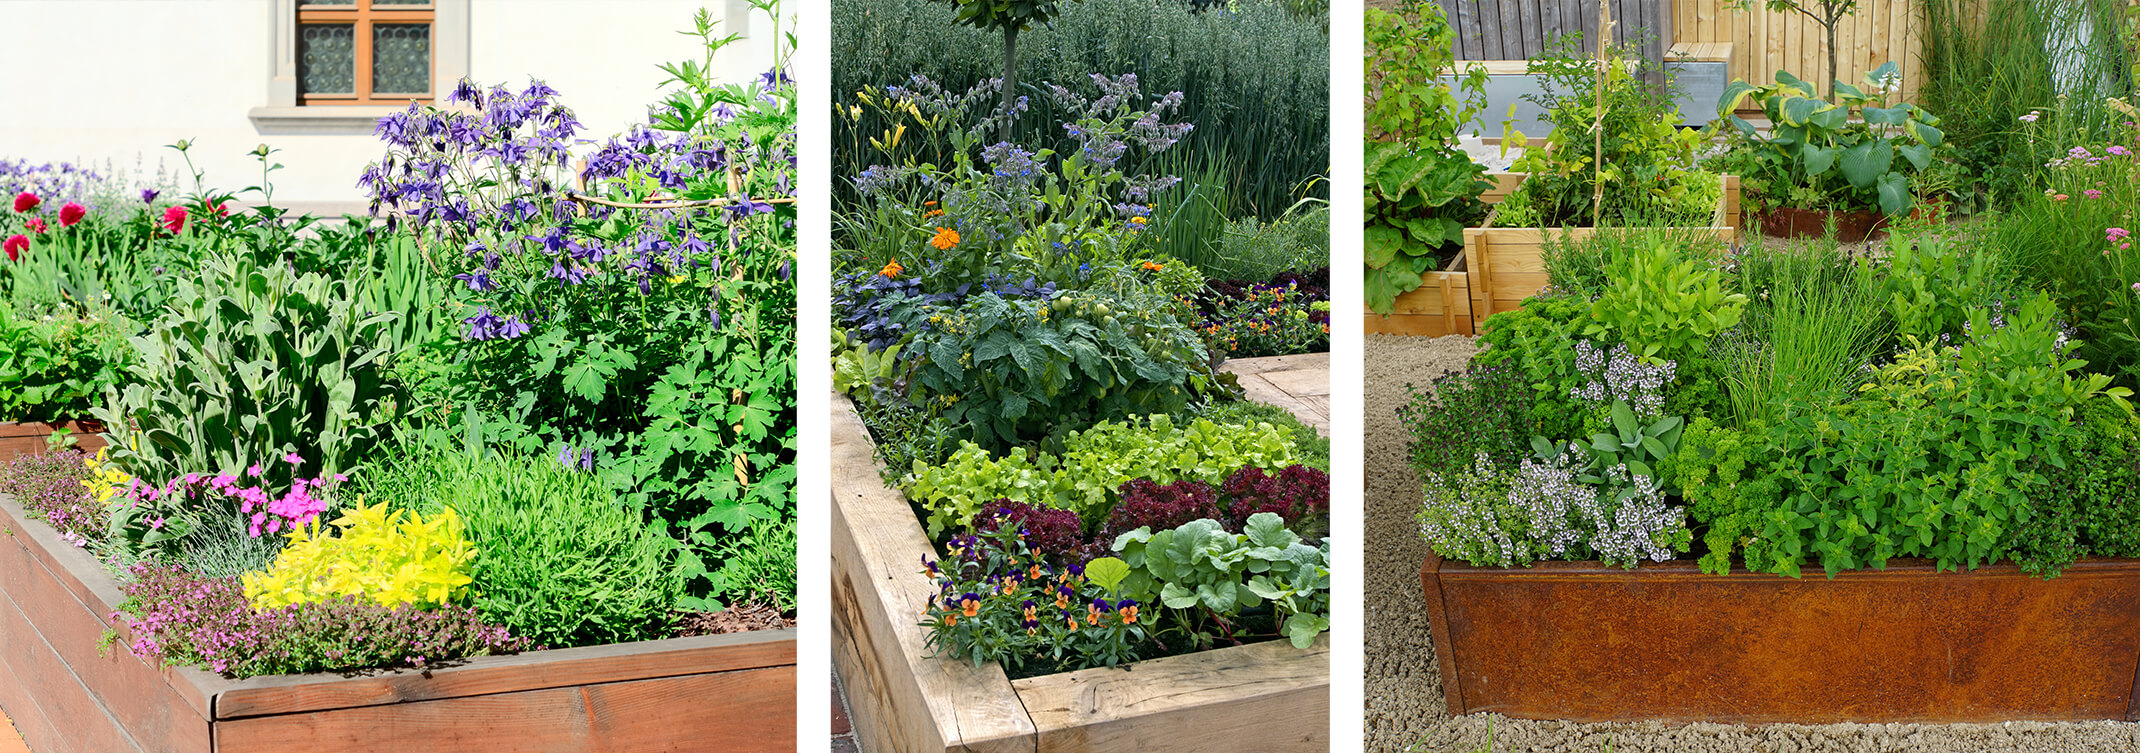 3 images: A wooden raised garden bed with a variety of flowers; a wooden raised garden bed with a variety of edible plants, herbs and flowers; and a metal raised garden bed with a variety of herbs and other raised garden beds in the background with misc plants